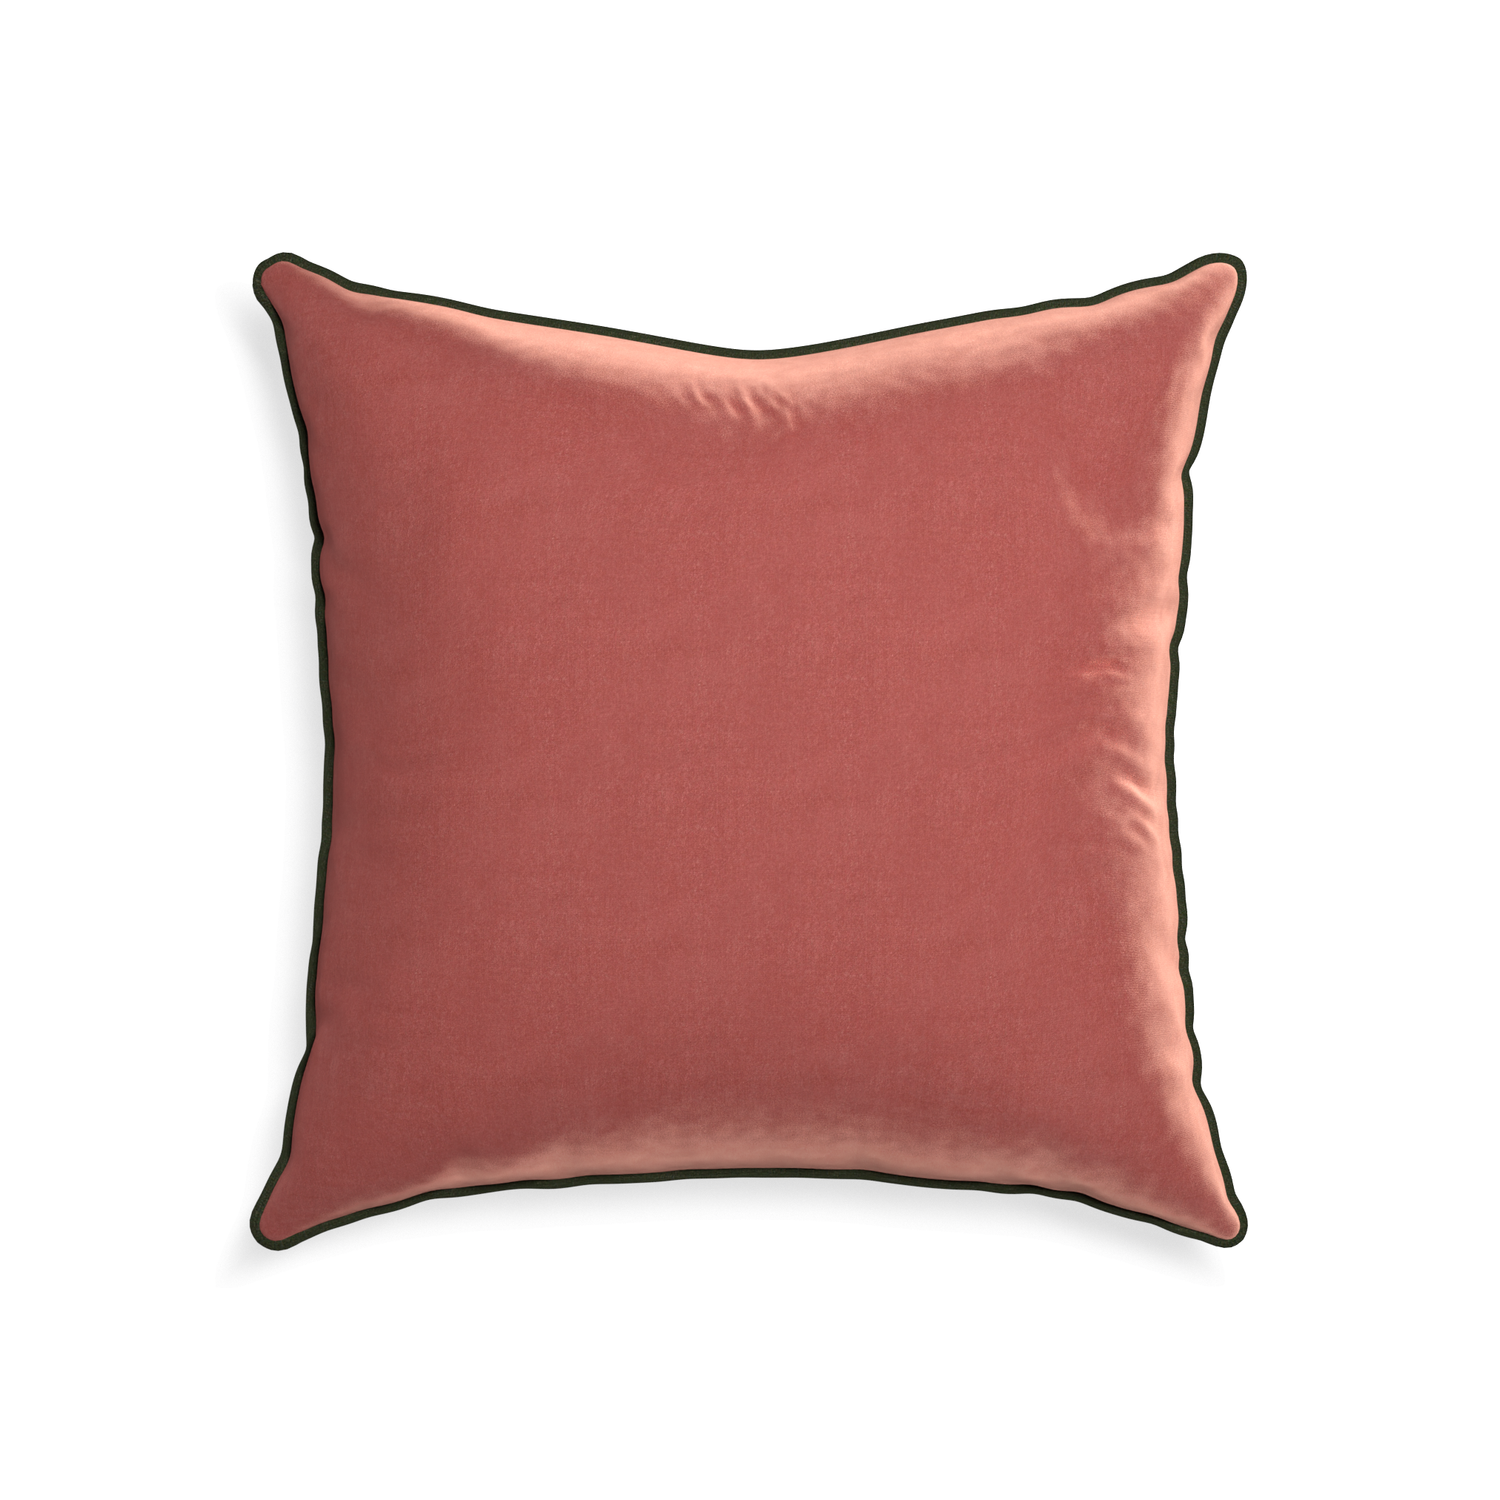 22-square cosmo velvet custom coralpillow with f piping on white background